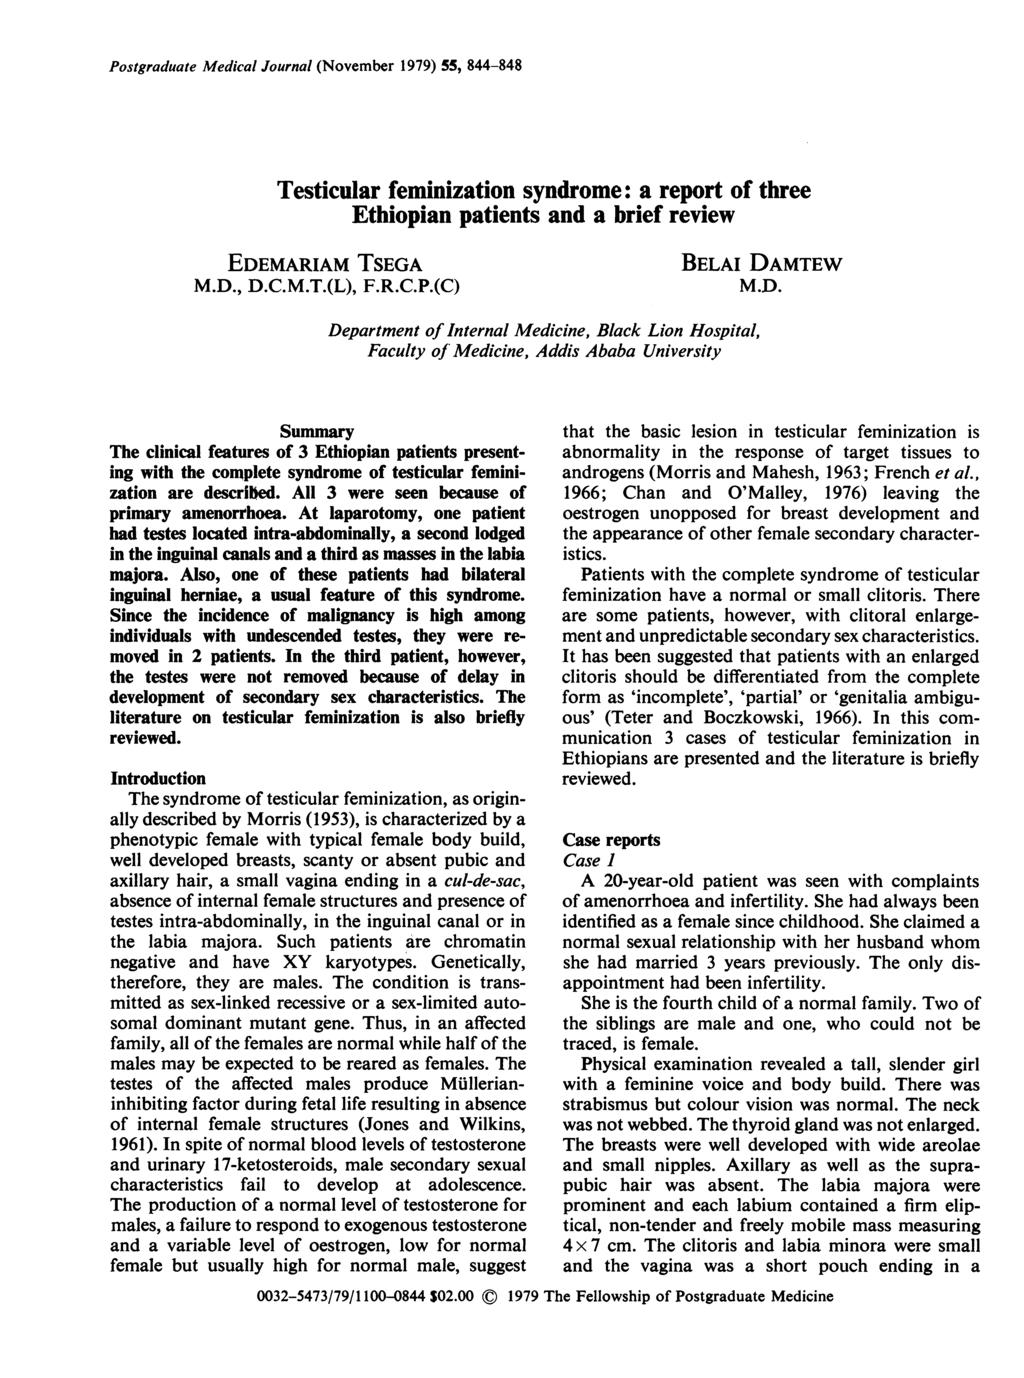 Postgraduate Medical Journal (November 1979) 55, 844-848 Testicular feminization syndrome: a report of three Ethiopian patients and a brief review EDEMARIAM TSEGA M.D., D.C.M.T.(L), F.R.C.P.(C) Summary The clinical features of 3 Ethiopian patients presenting with the complete syndrome of testicular feminization are descrilbed.